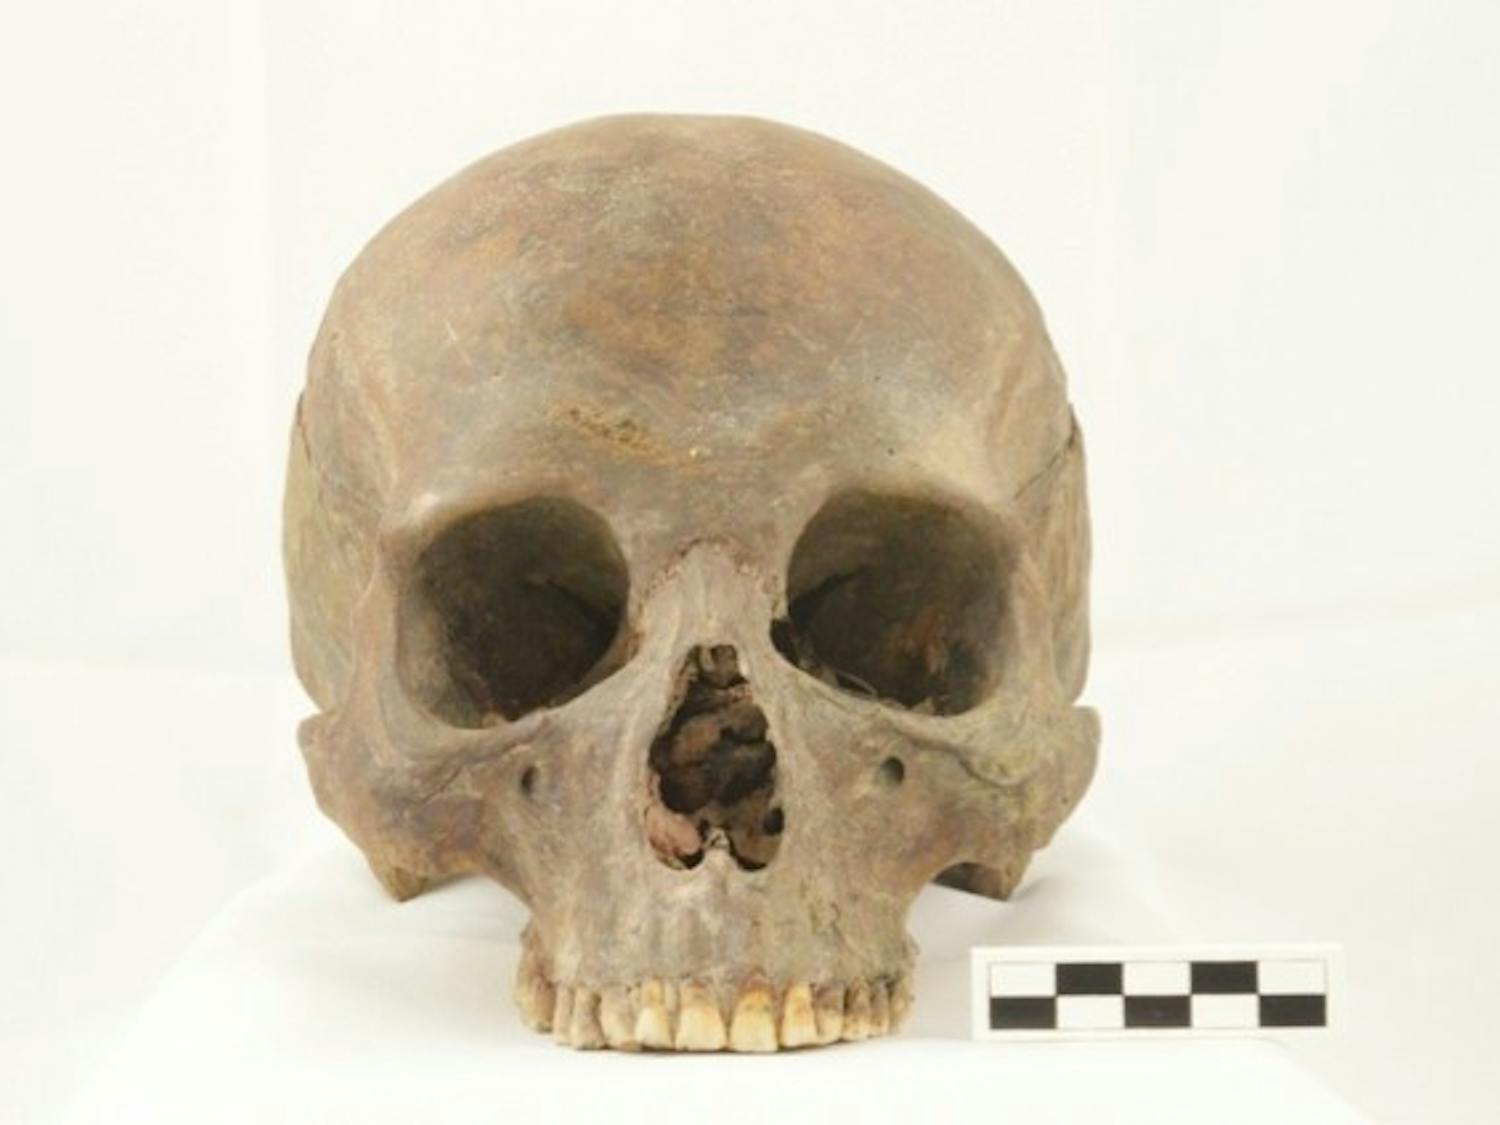 A skull (pictured) recovered from the excavations done on on the former Erie County Poorhouse cemetery, which was located on South Campus before UB purchased the land.